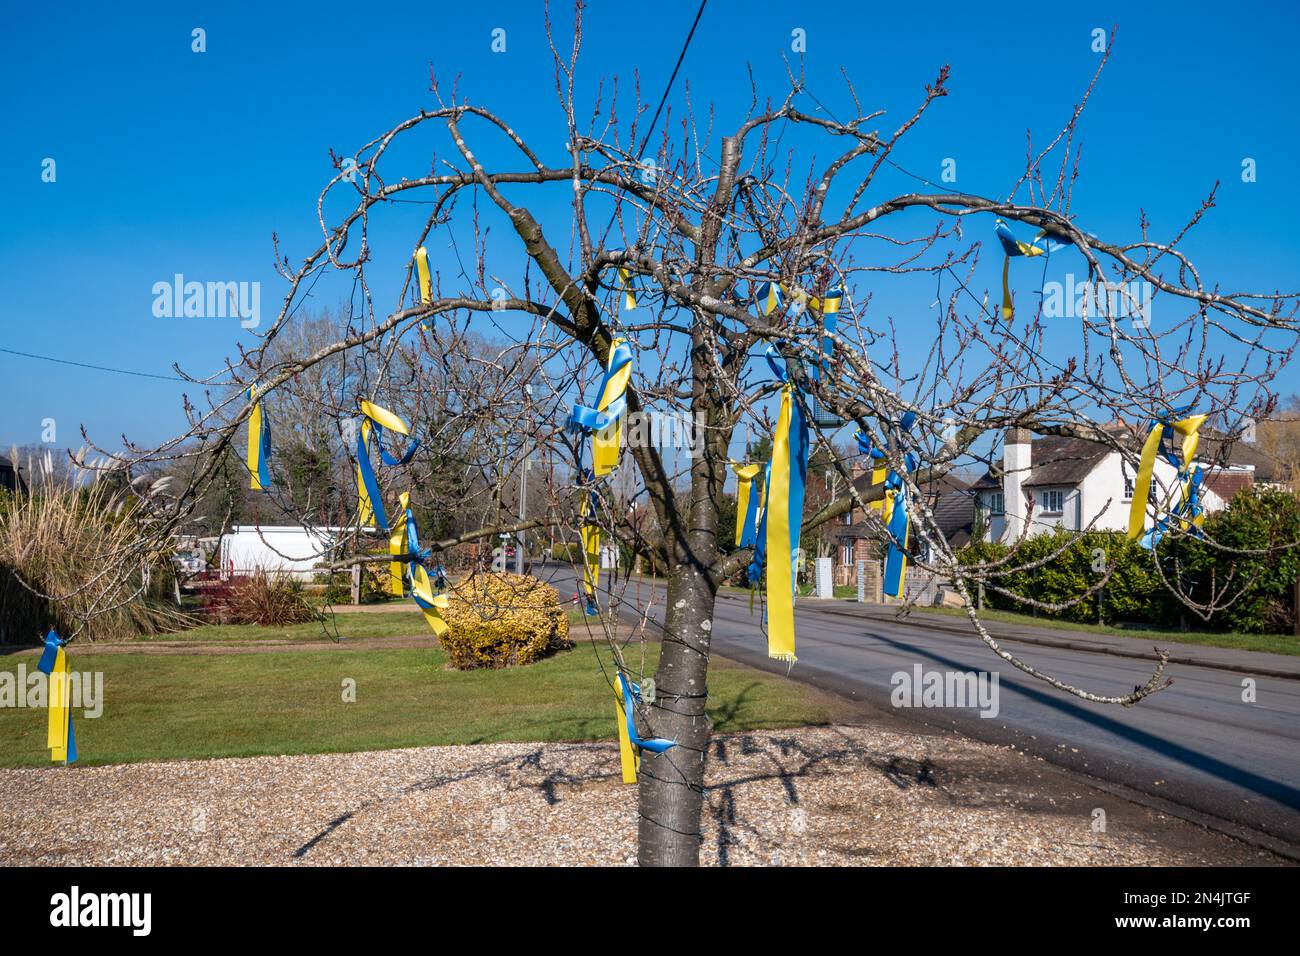 08 February 2023. Almost a year after the full-scale invasion of Ukraine by Russia, blue and yellow ribbons have been hung from a tree in Surrey, England, UK, the Ukrainian flag colours showing continuing British support for the Ukrainians. Stock Photo